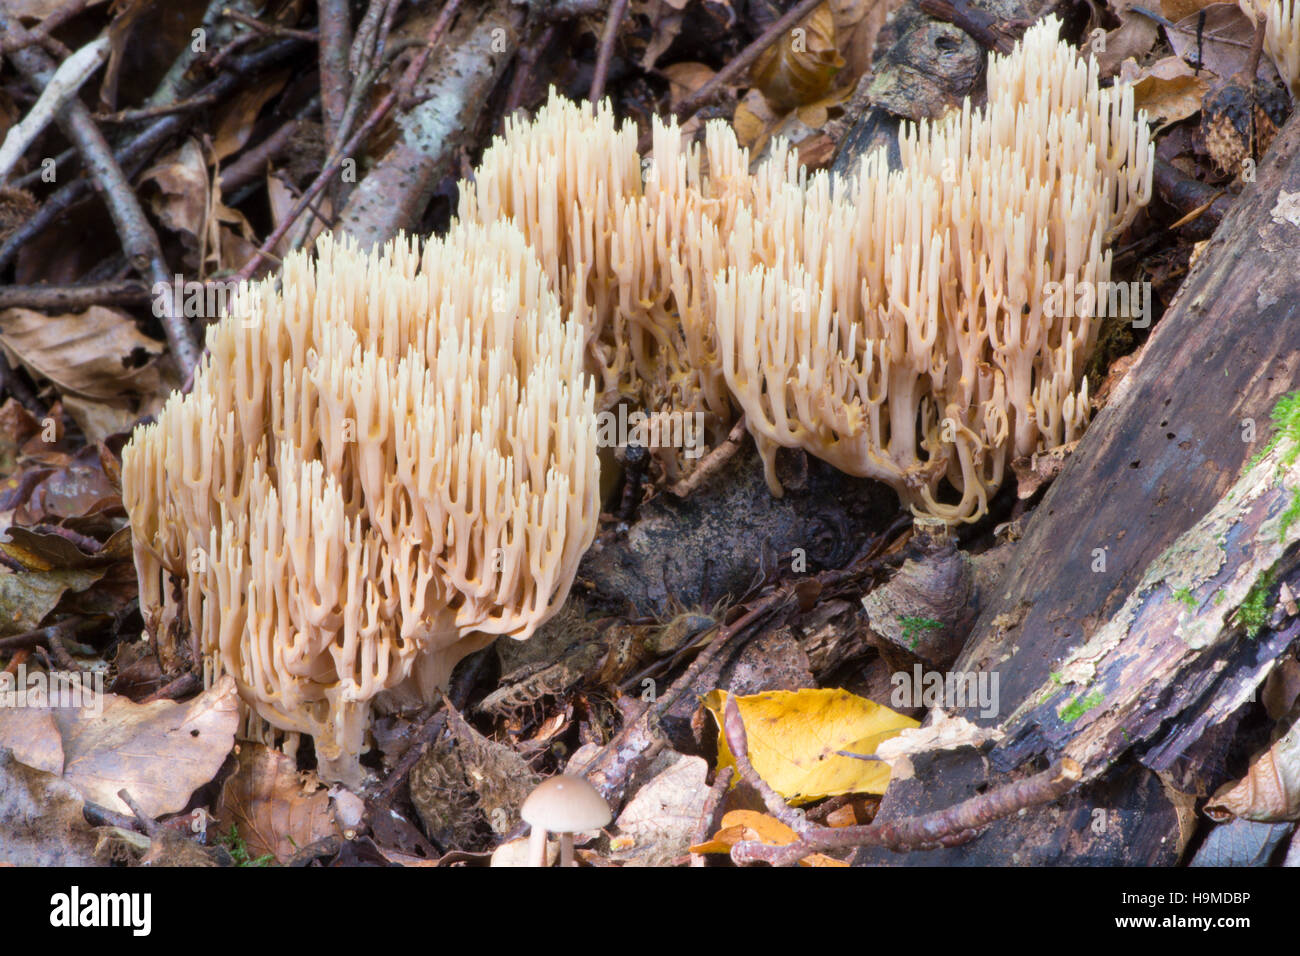 Ramaria stricta, Upright Coral Fungus, Sussex, UK, October Stock Photo